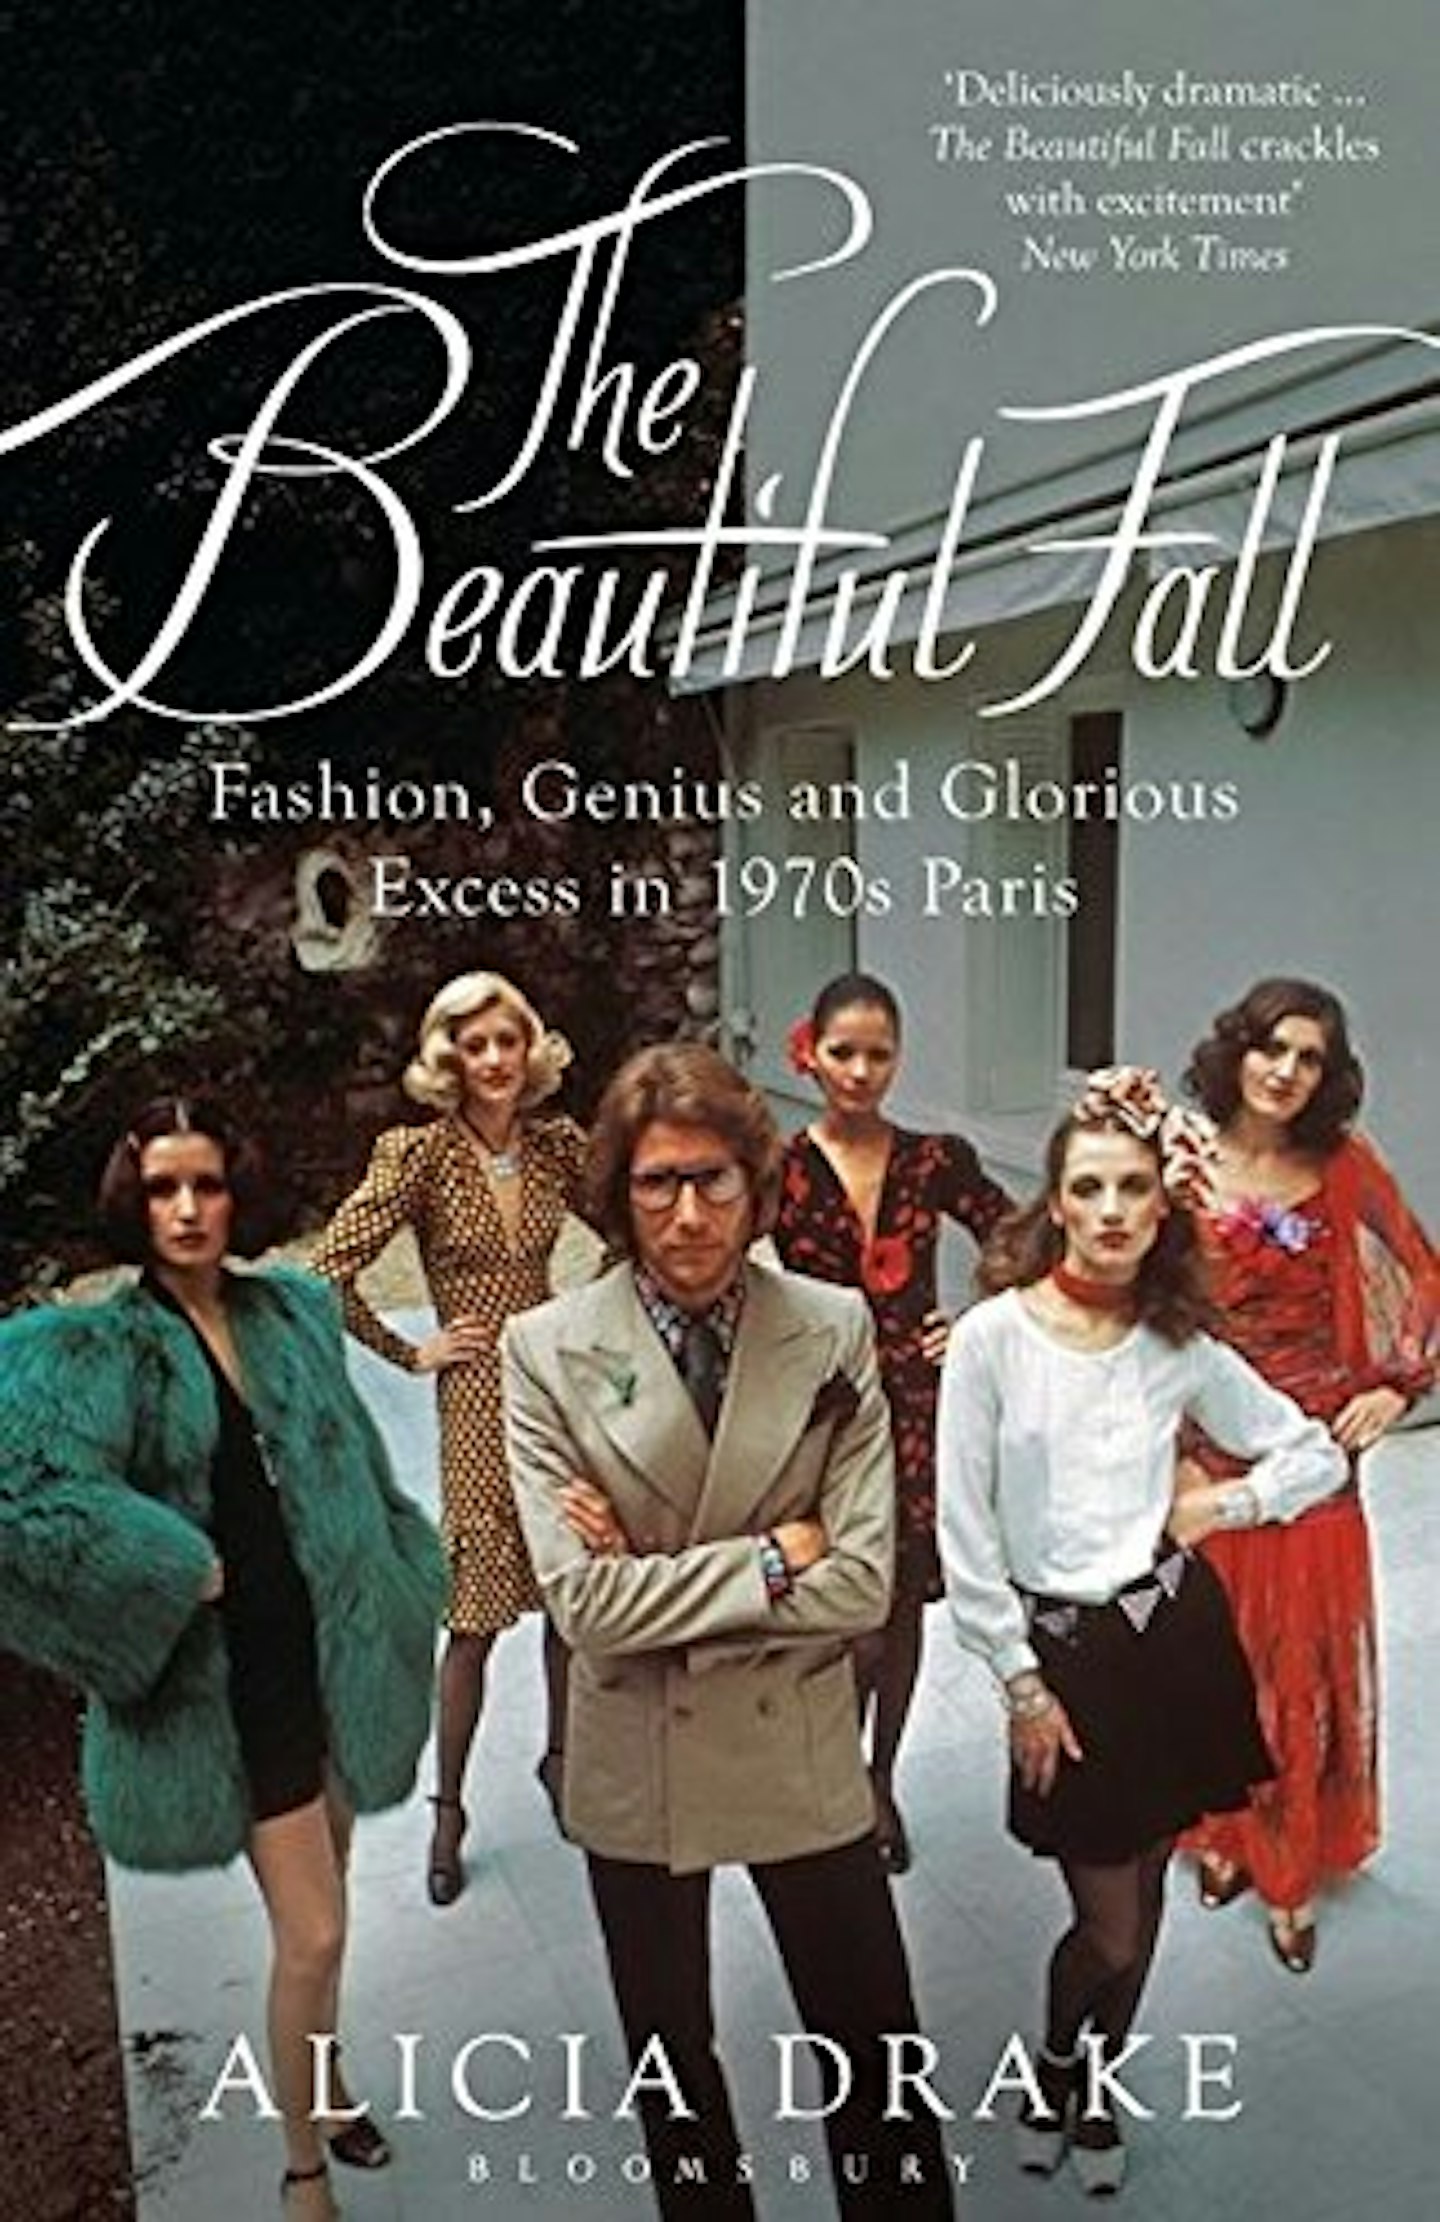 The Beautiful Fall: Fashion, Genius And Glorious Excess In 1970s Paris by Alicia Drake, £12.79